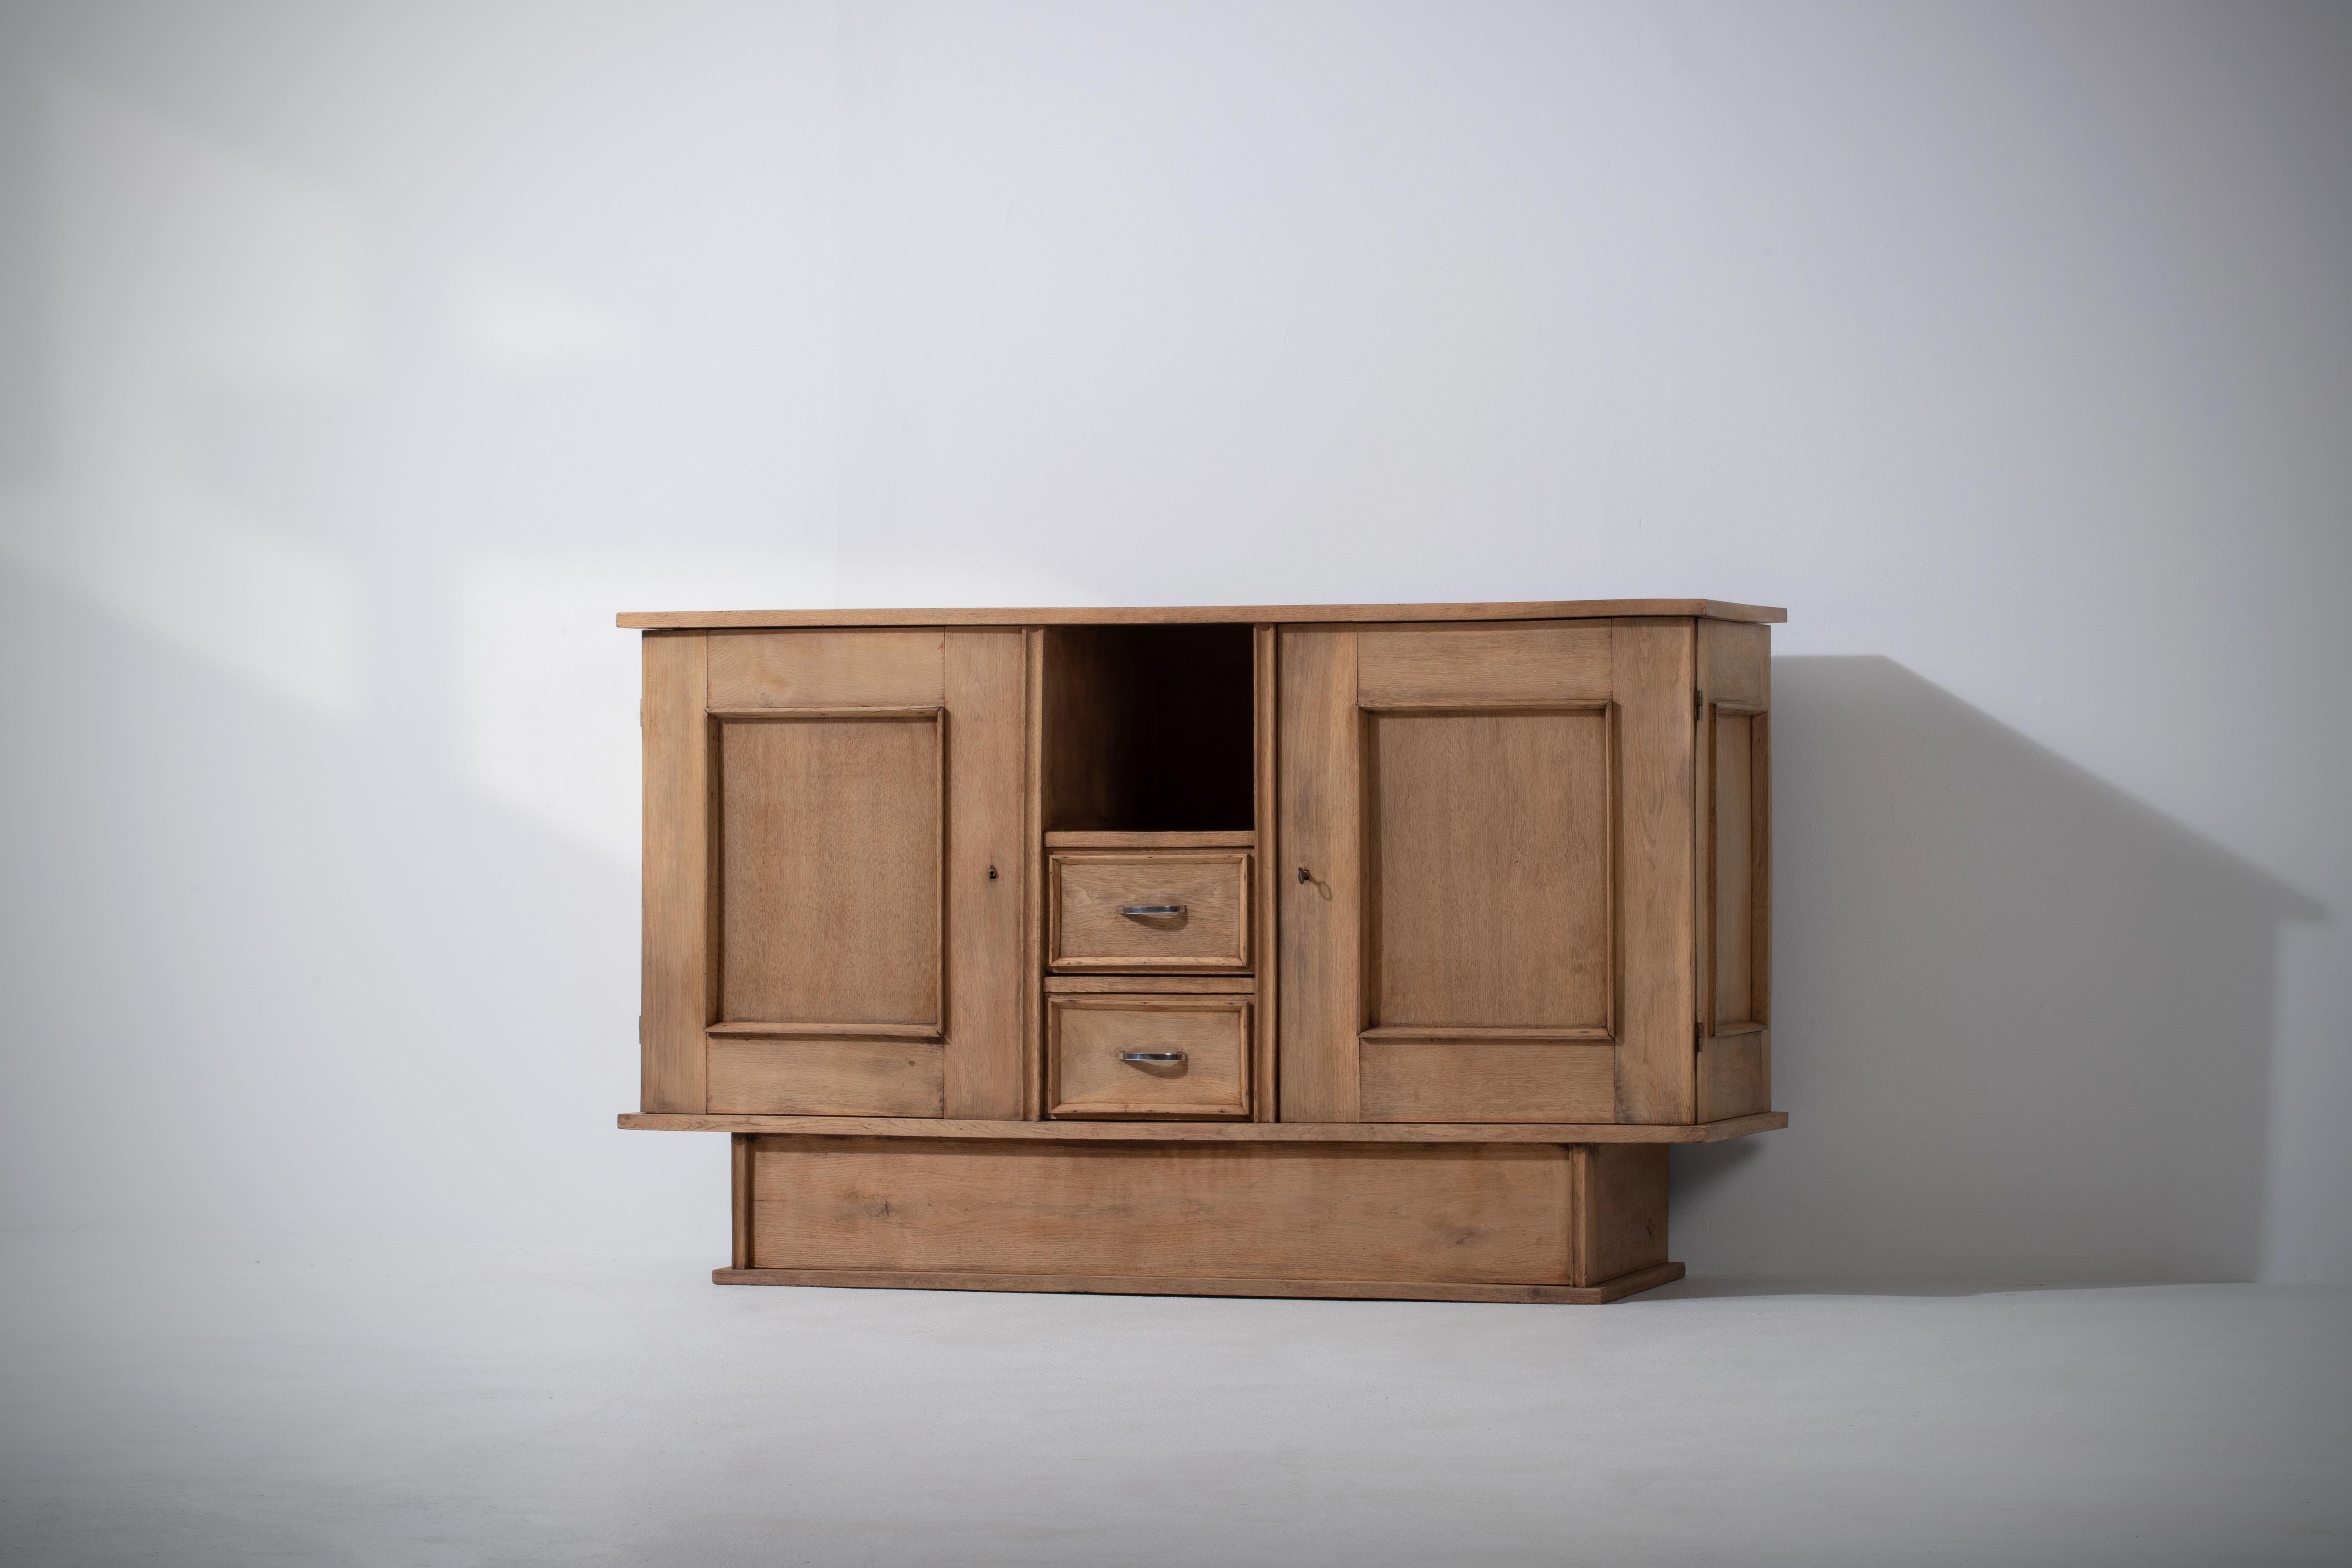 Elegant Credenza, solid oak, France, 1940s.
Nice modernist design. 
The credenza consists of two laterals storage facilities and central niche. 
Good condition.